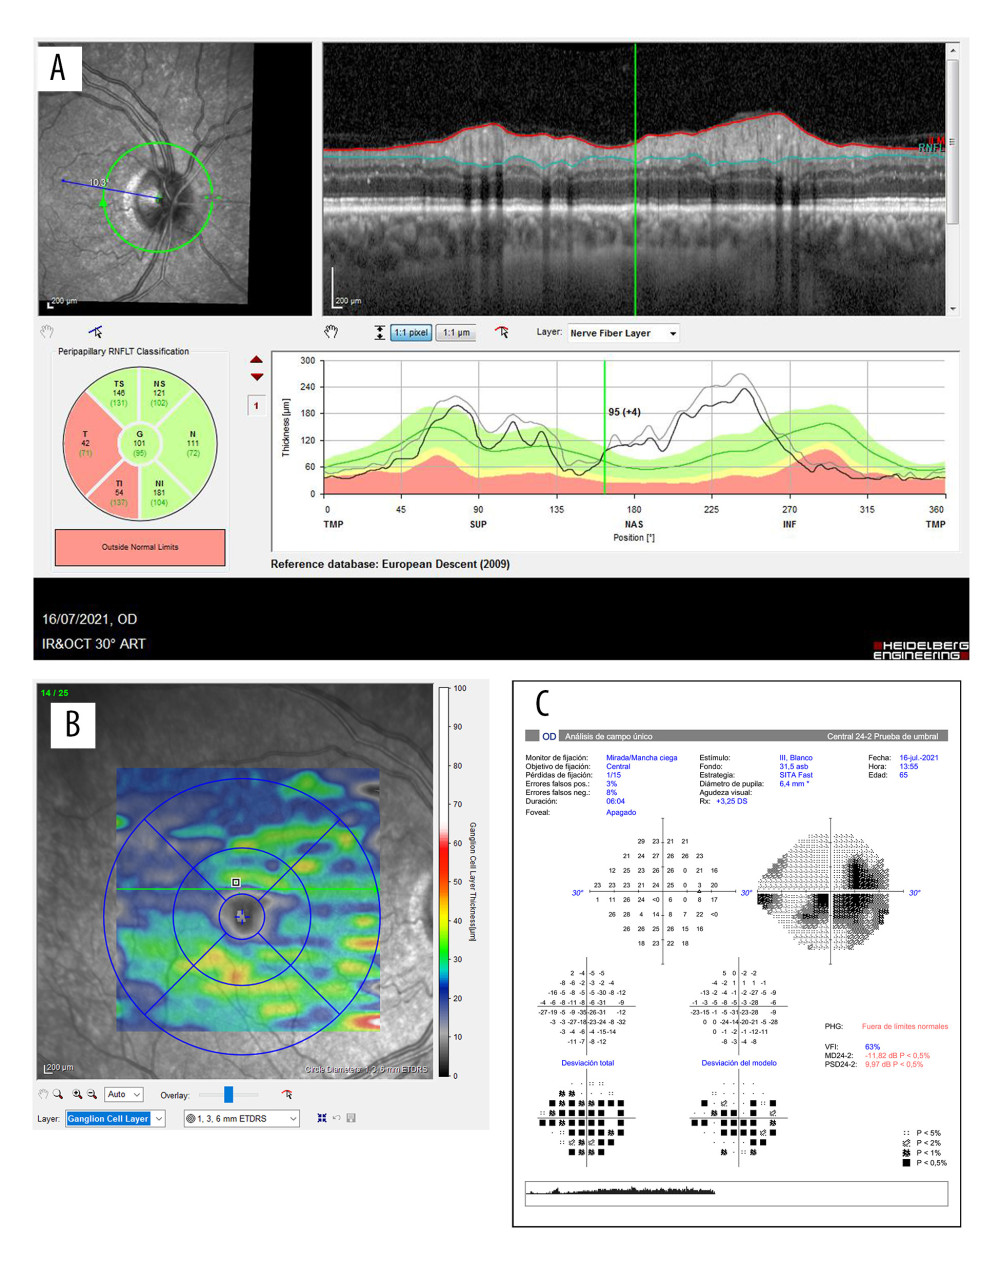 Evolution of the OCT and Humphrey 24-2 visual field in the second case. A shows the RNFL of the right eye and the correspondence of the atrophic quadrants in the affected eye after a month of the symptoms. B illustrates general loss of ganglion cells of the right eye. Image C illustrates the Humphrey 24-2 visual field of the right eye, showing a centrocecal scotoma.